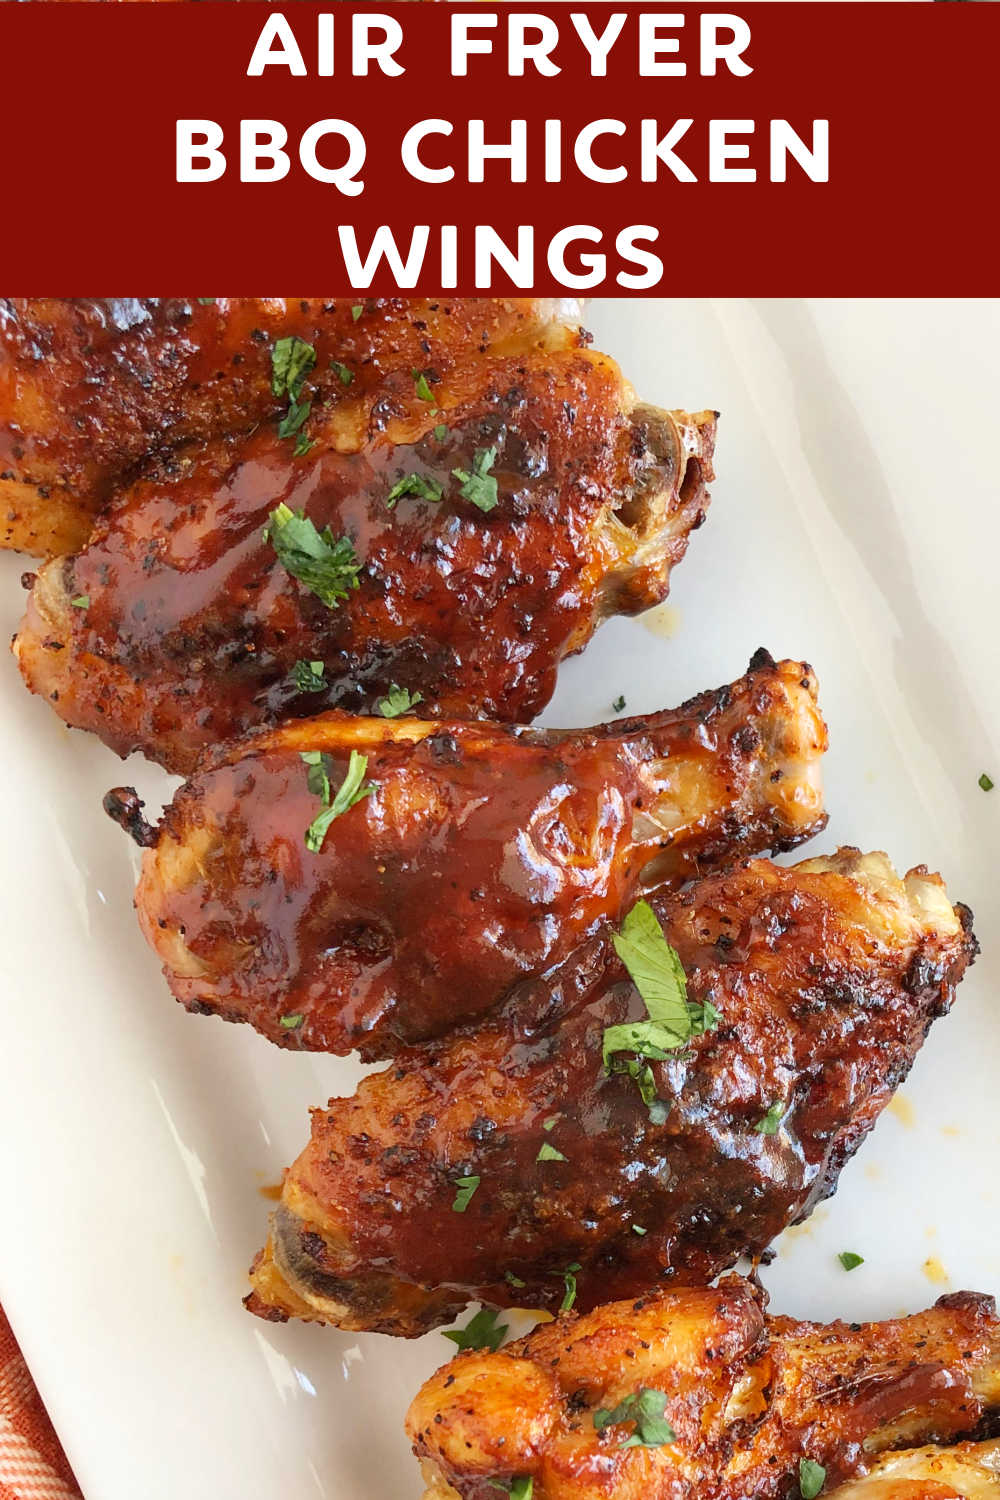 Air Fryer BBQ Chicken Wings seasoned with dry rub and topped with barbecue sauce are delicious crispy wings that are better than deep fried. This easy air fryer chicken wing recipe is perfect for family dinner or a game day appetizer! via @meamel